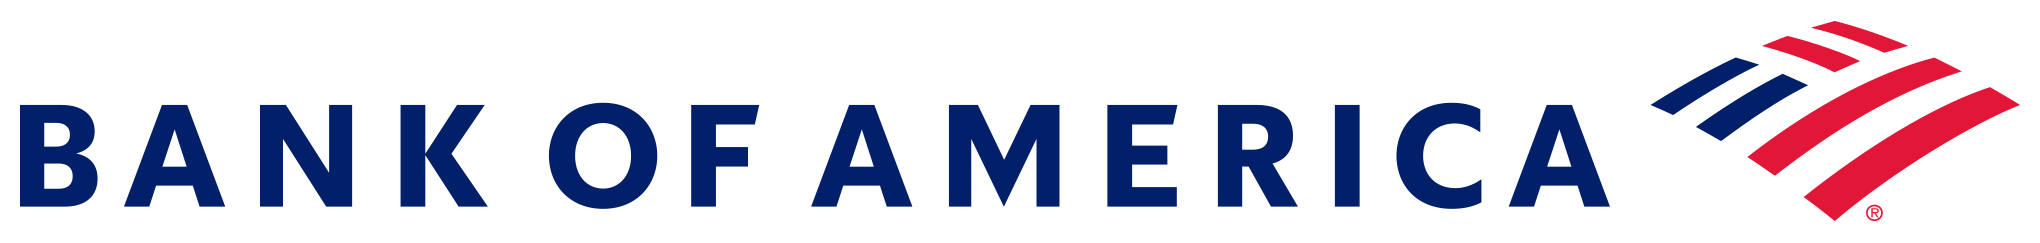 bank_of_america_logo_a.png